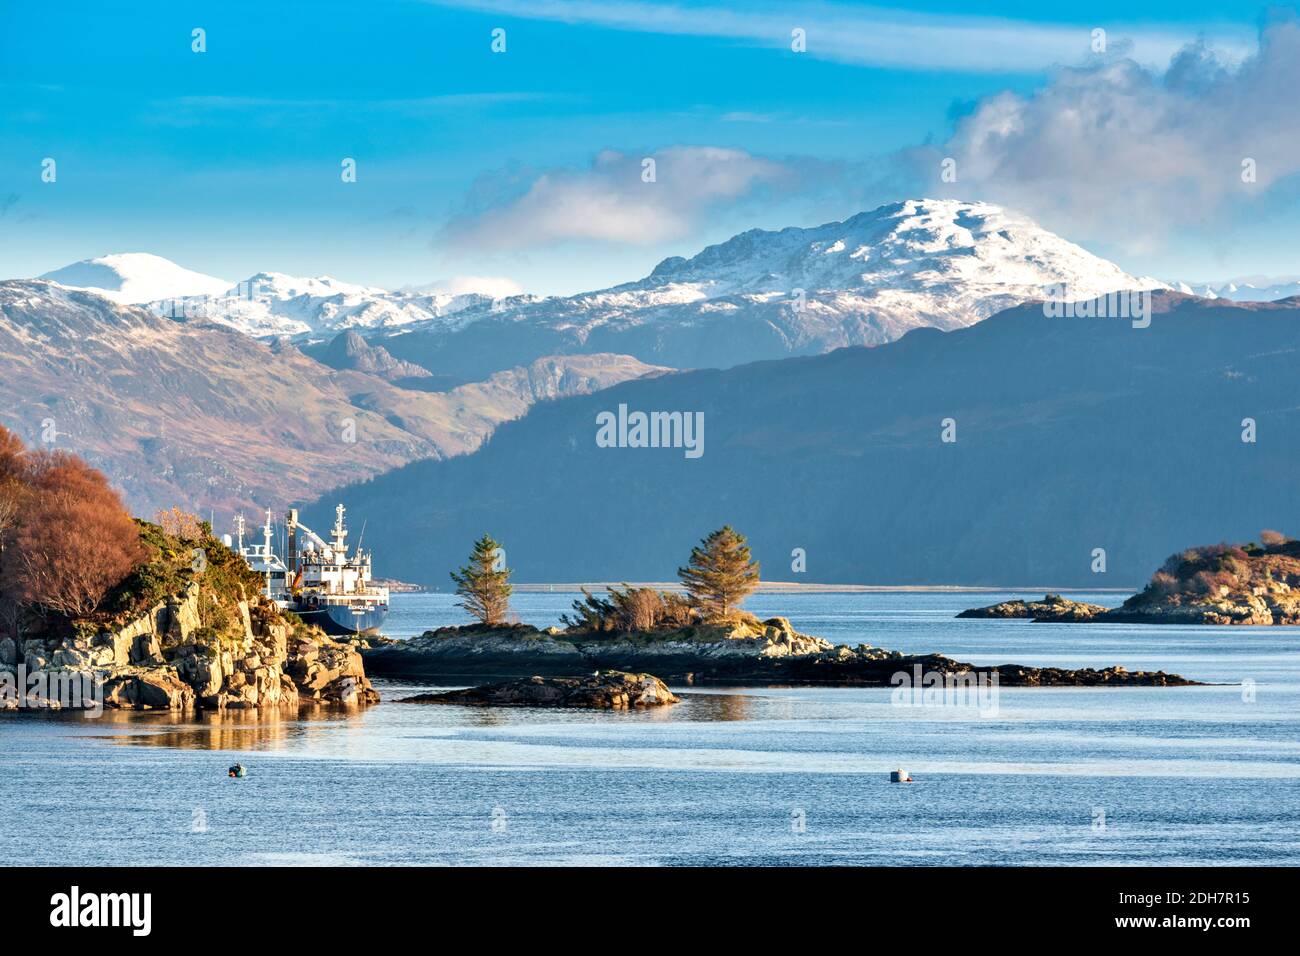 KYLE OF LOCHALSH  ROSS-SHIRE SCOTLAND RUGGED COASTLINE BOATS MOORED ALONG THE SHORE OF LOCH ALSH SNOW ON THE HILLS Stock Photo